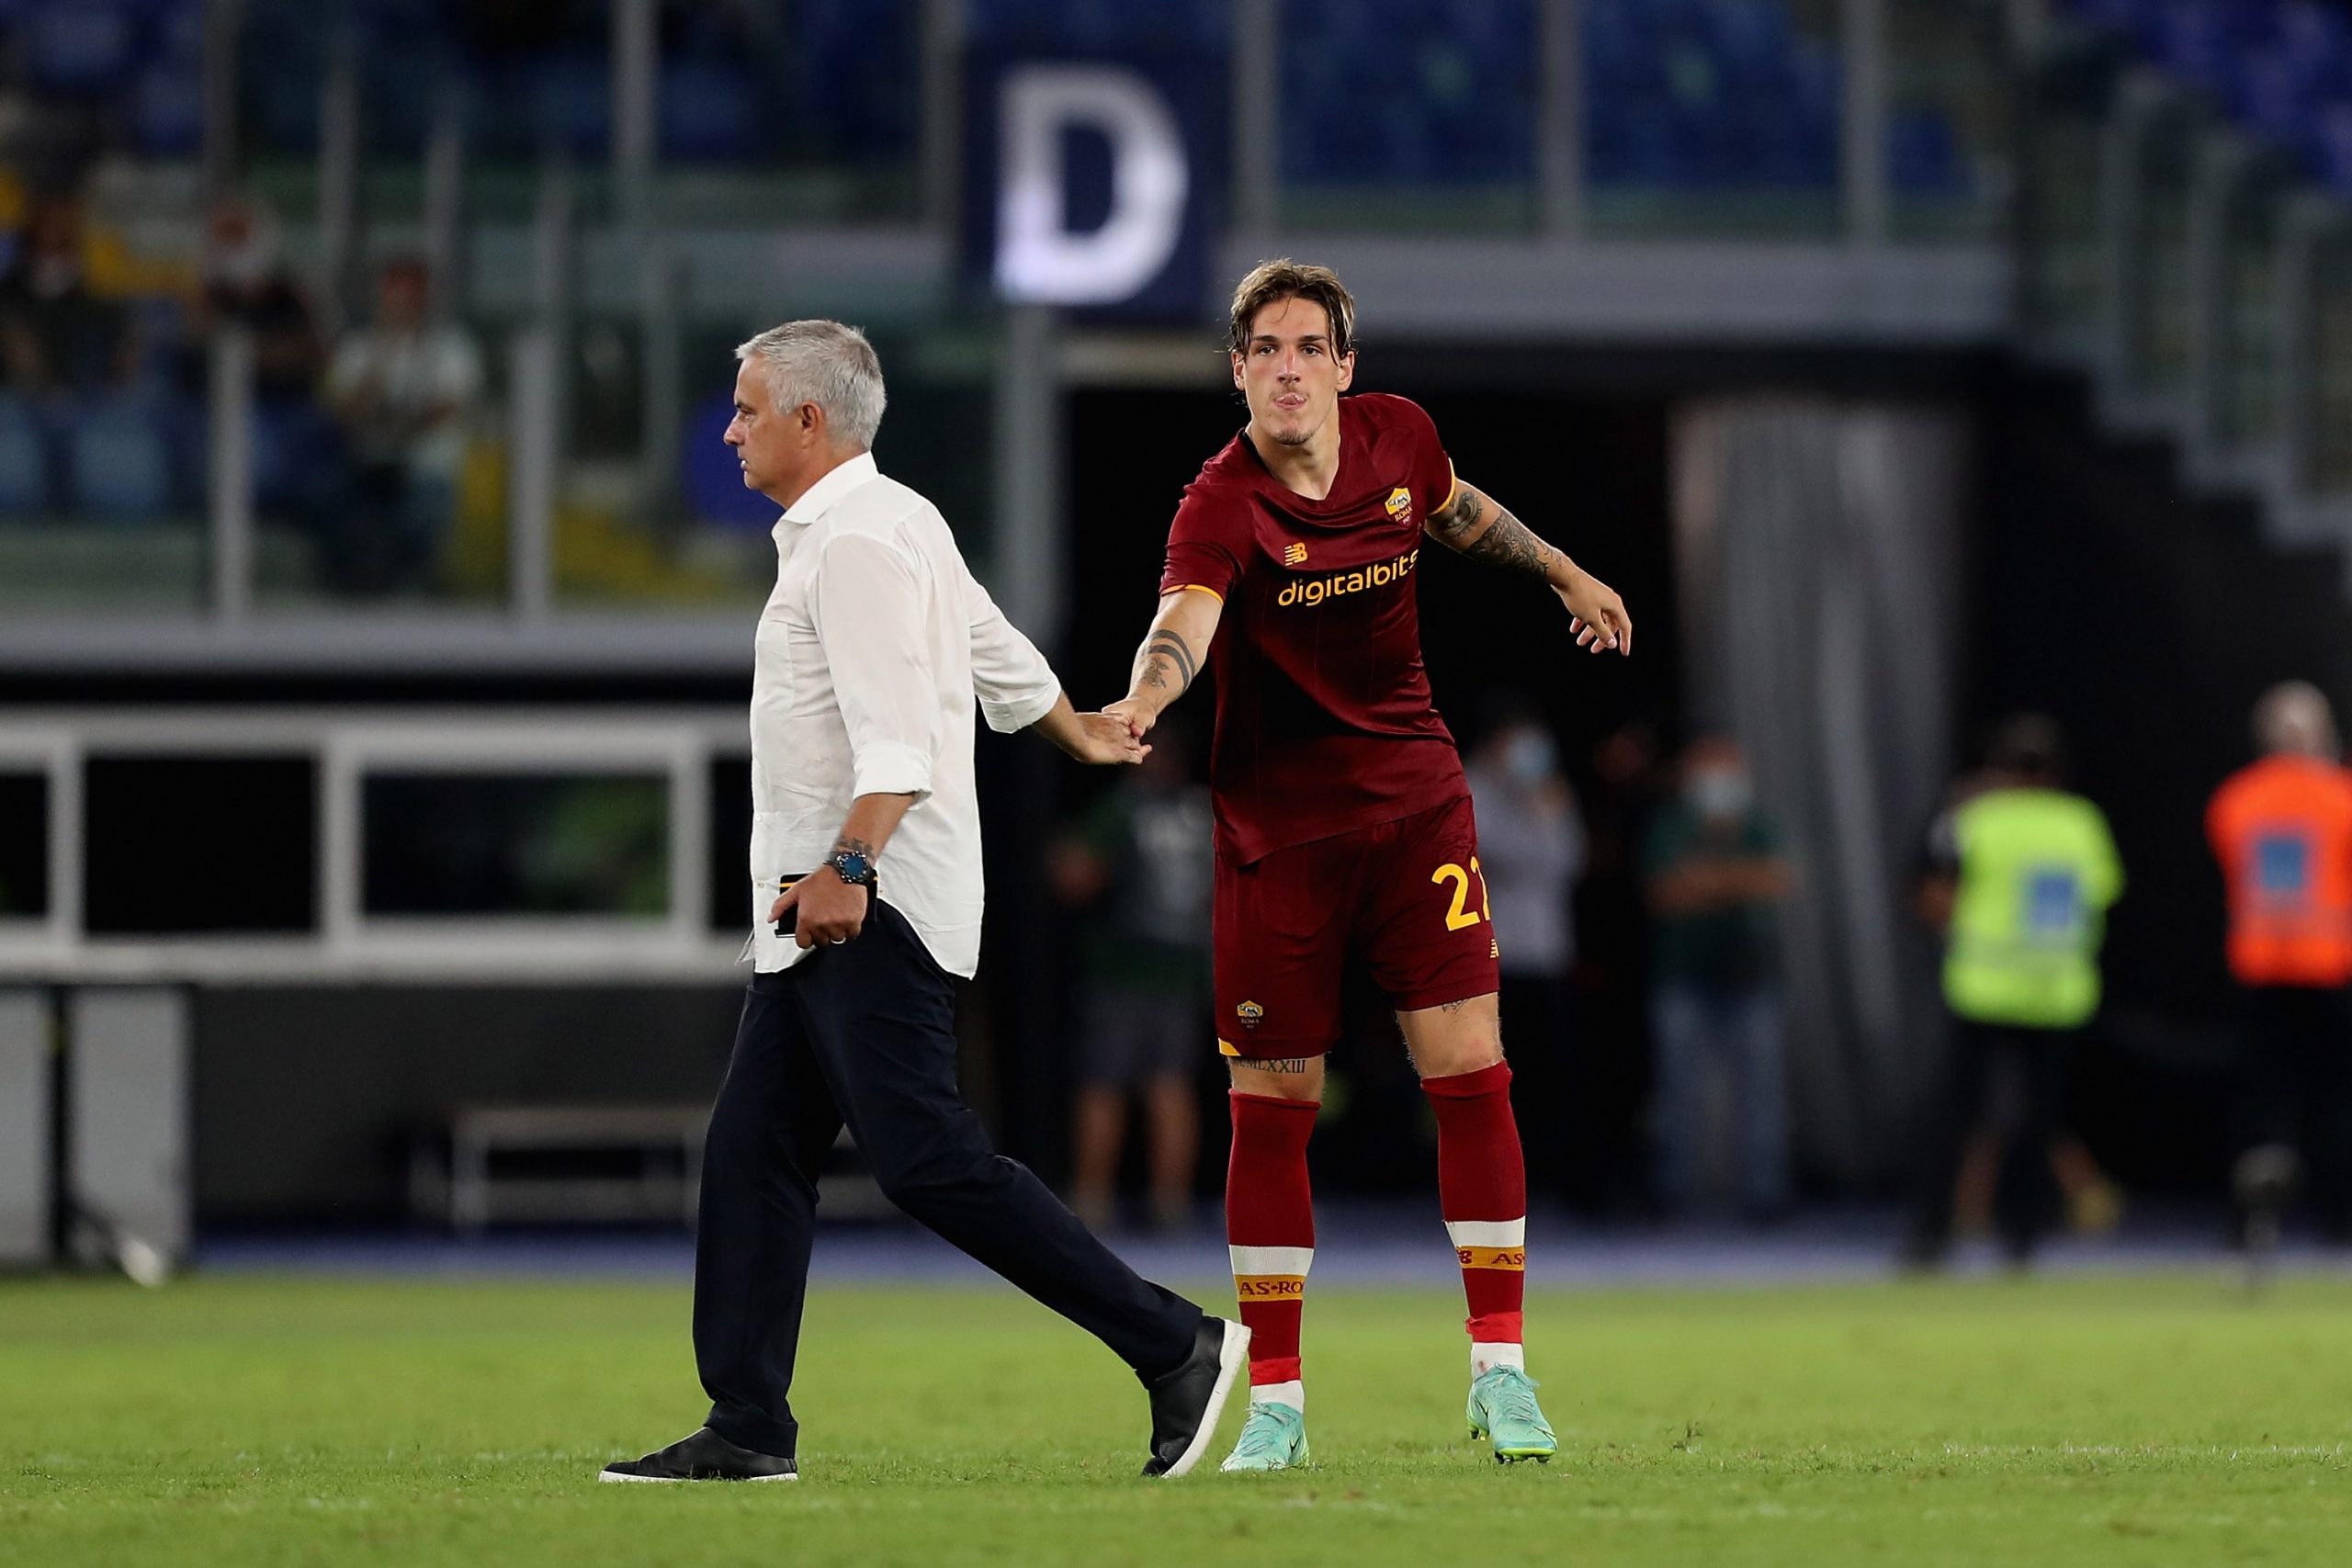 Tottenham Hotspur target Nicolo Zaniolo is keen to join the club in the January transfer window.